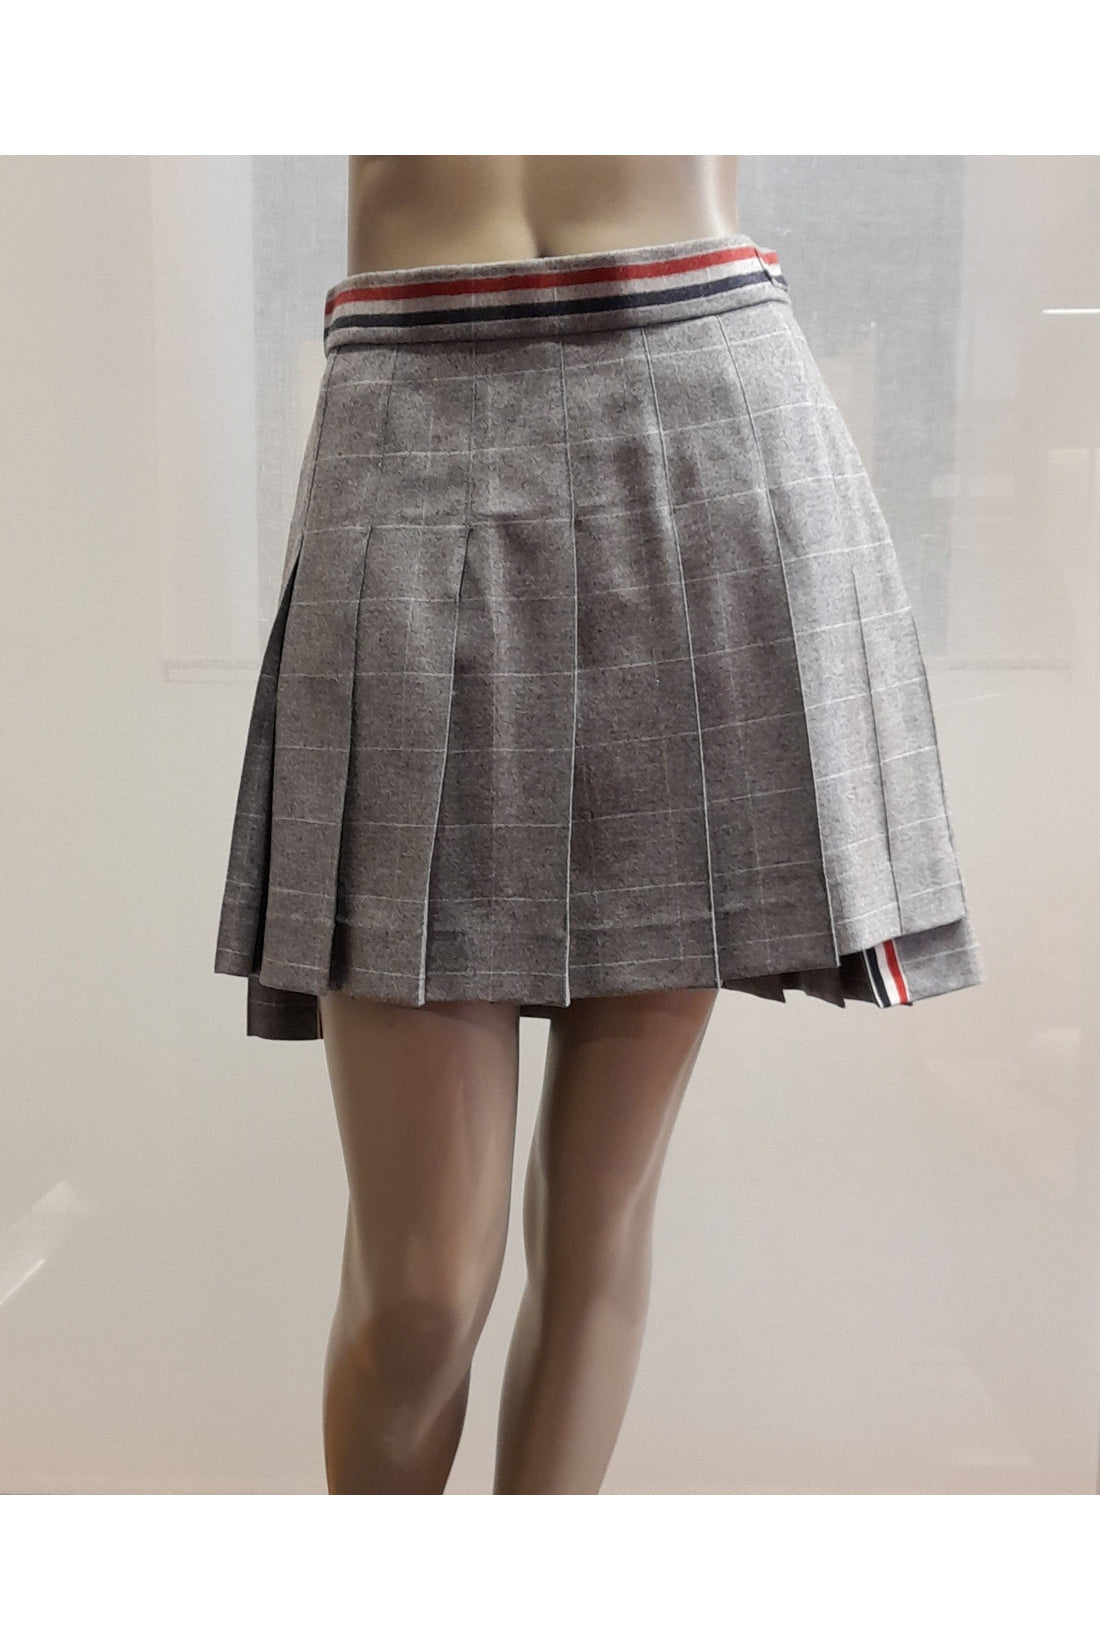 Thom Browne-OUTLET-SALE-Pleated flannel skirt-ARCHIVIST